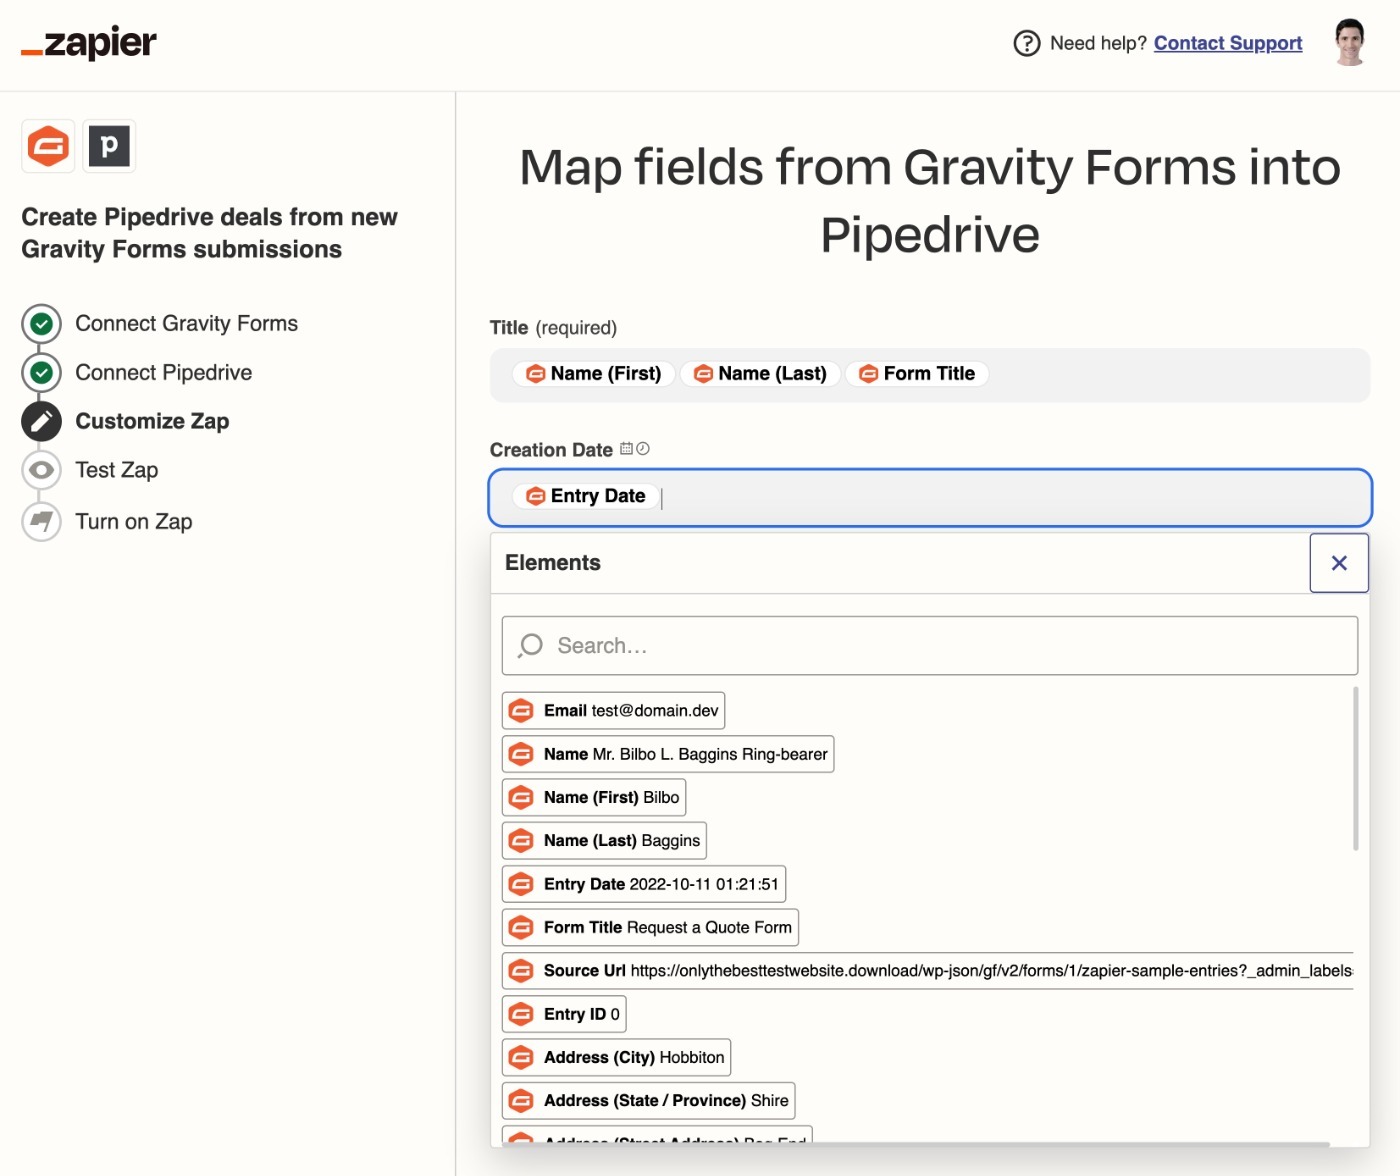 Map form fields to Pipedrive